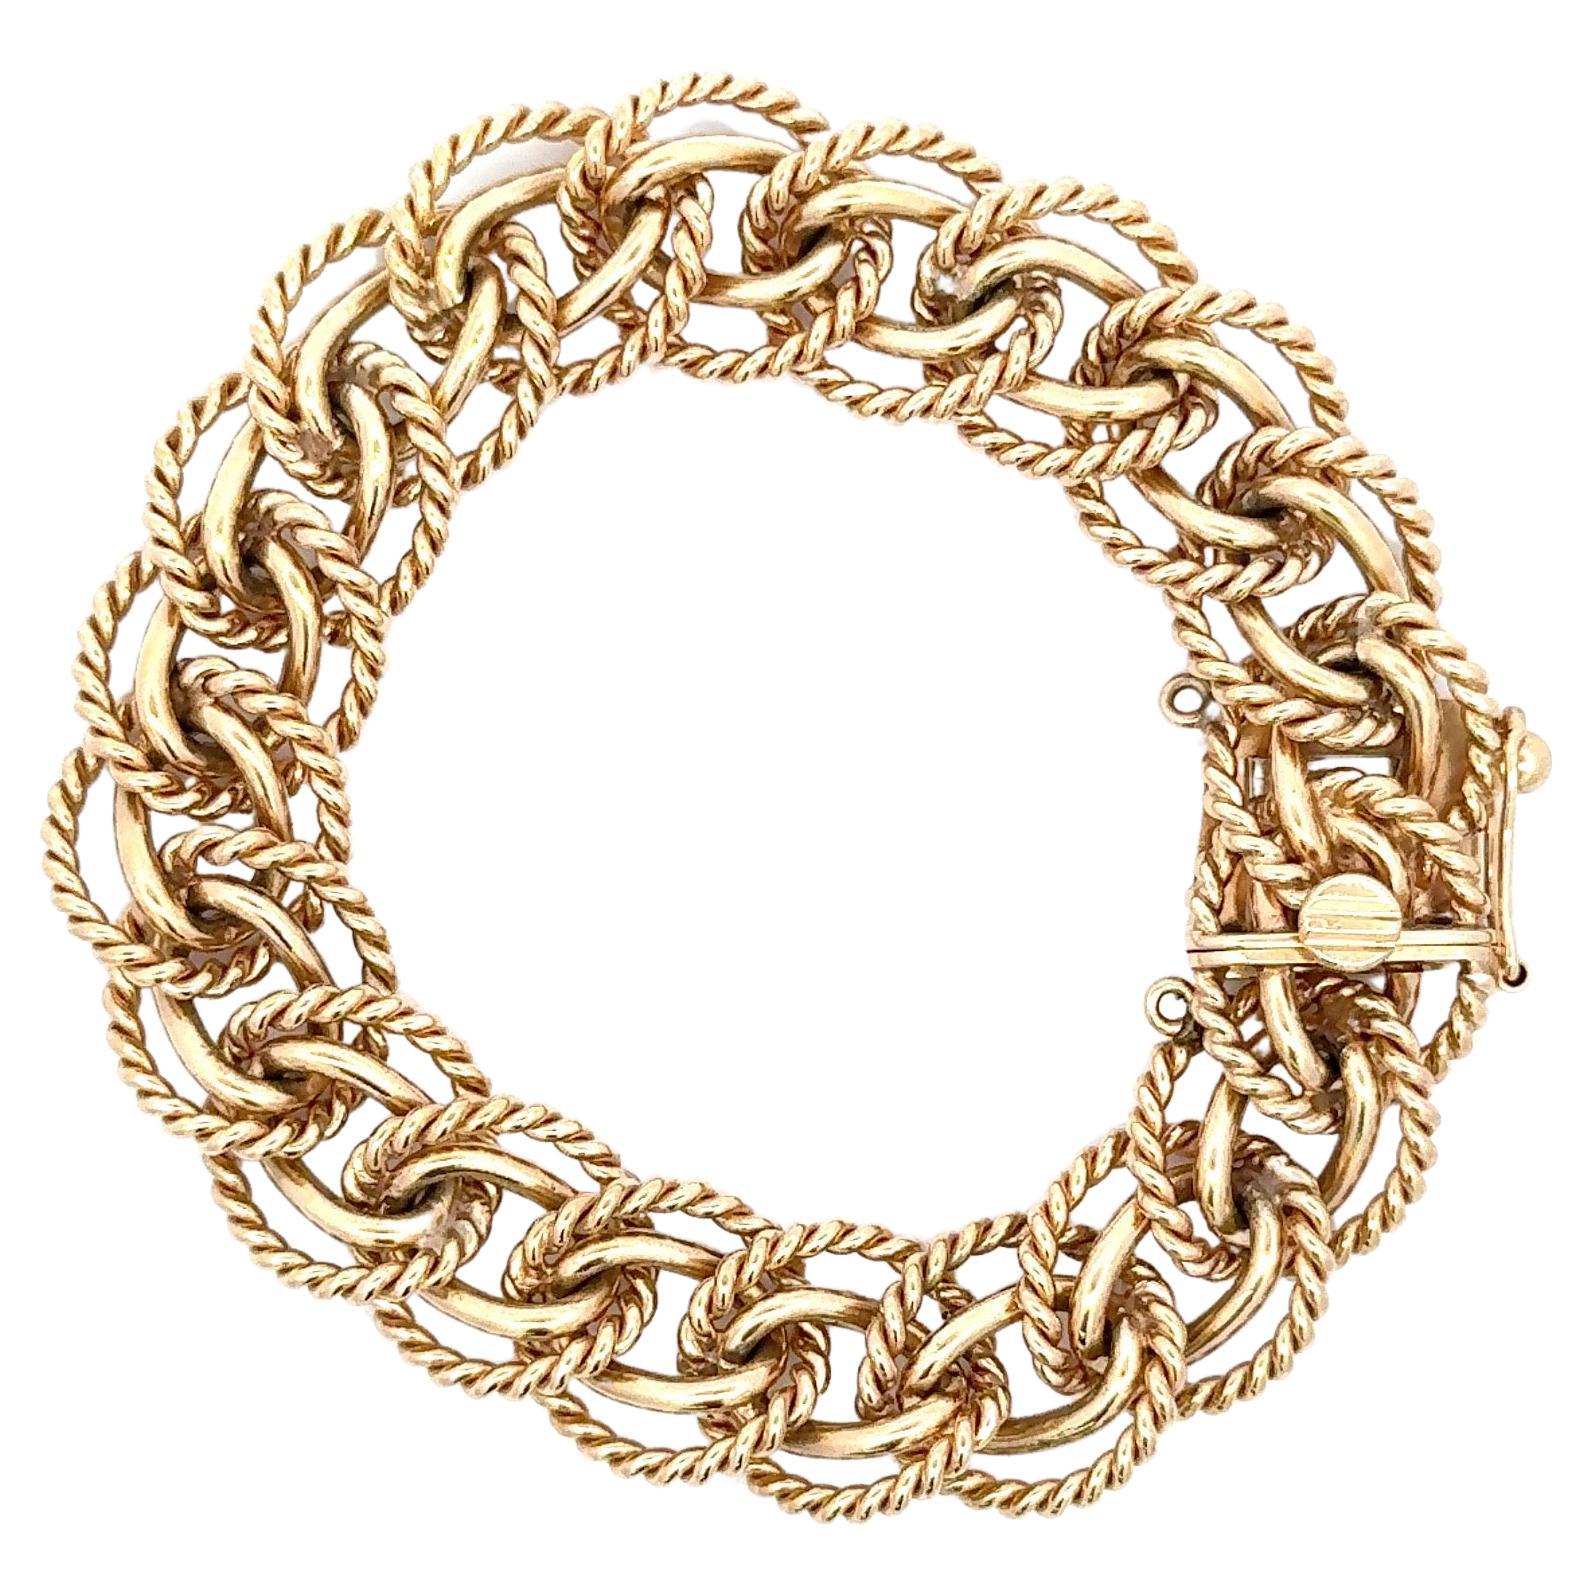 This double row bracelet features two rows of a twist and high polish links weighing 68.6 grams, in 14 karat yellow gold. 
7.75 inches